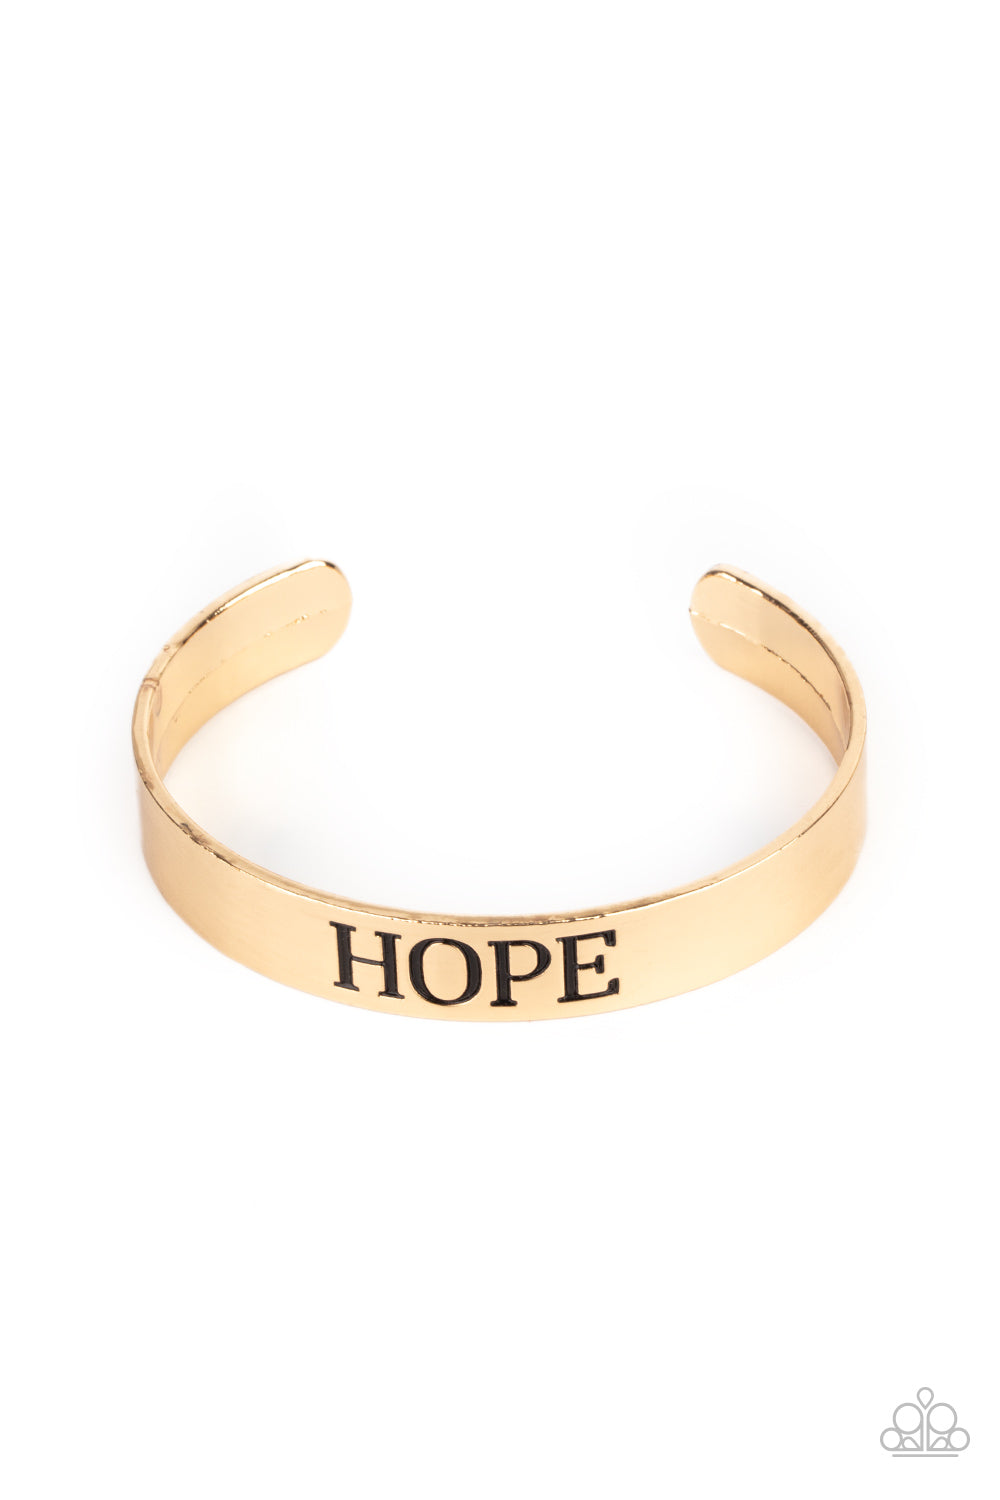 Paparazzi Accessories Hope Makes The World Go Round - Gold